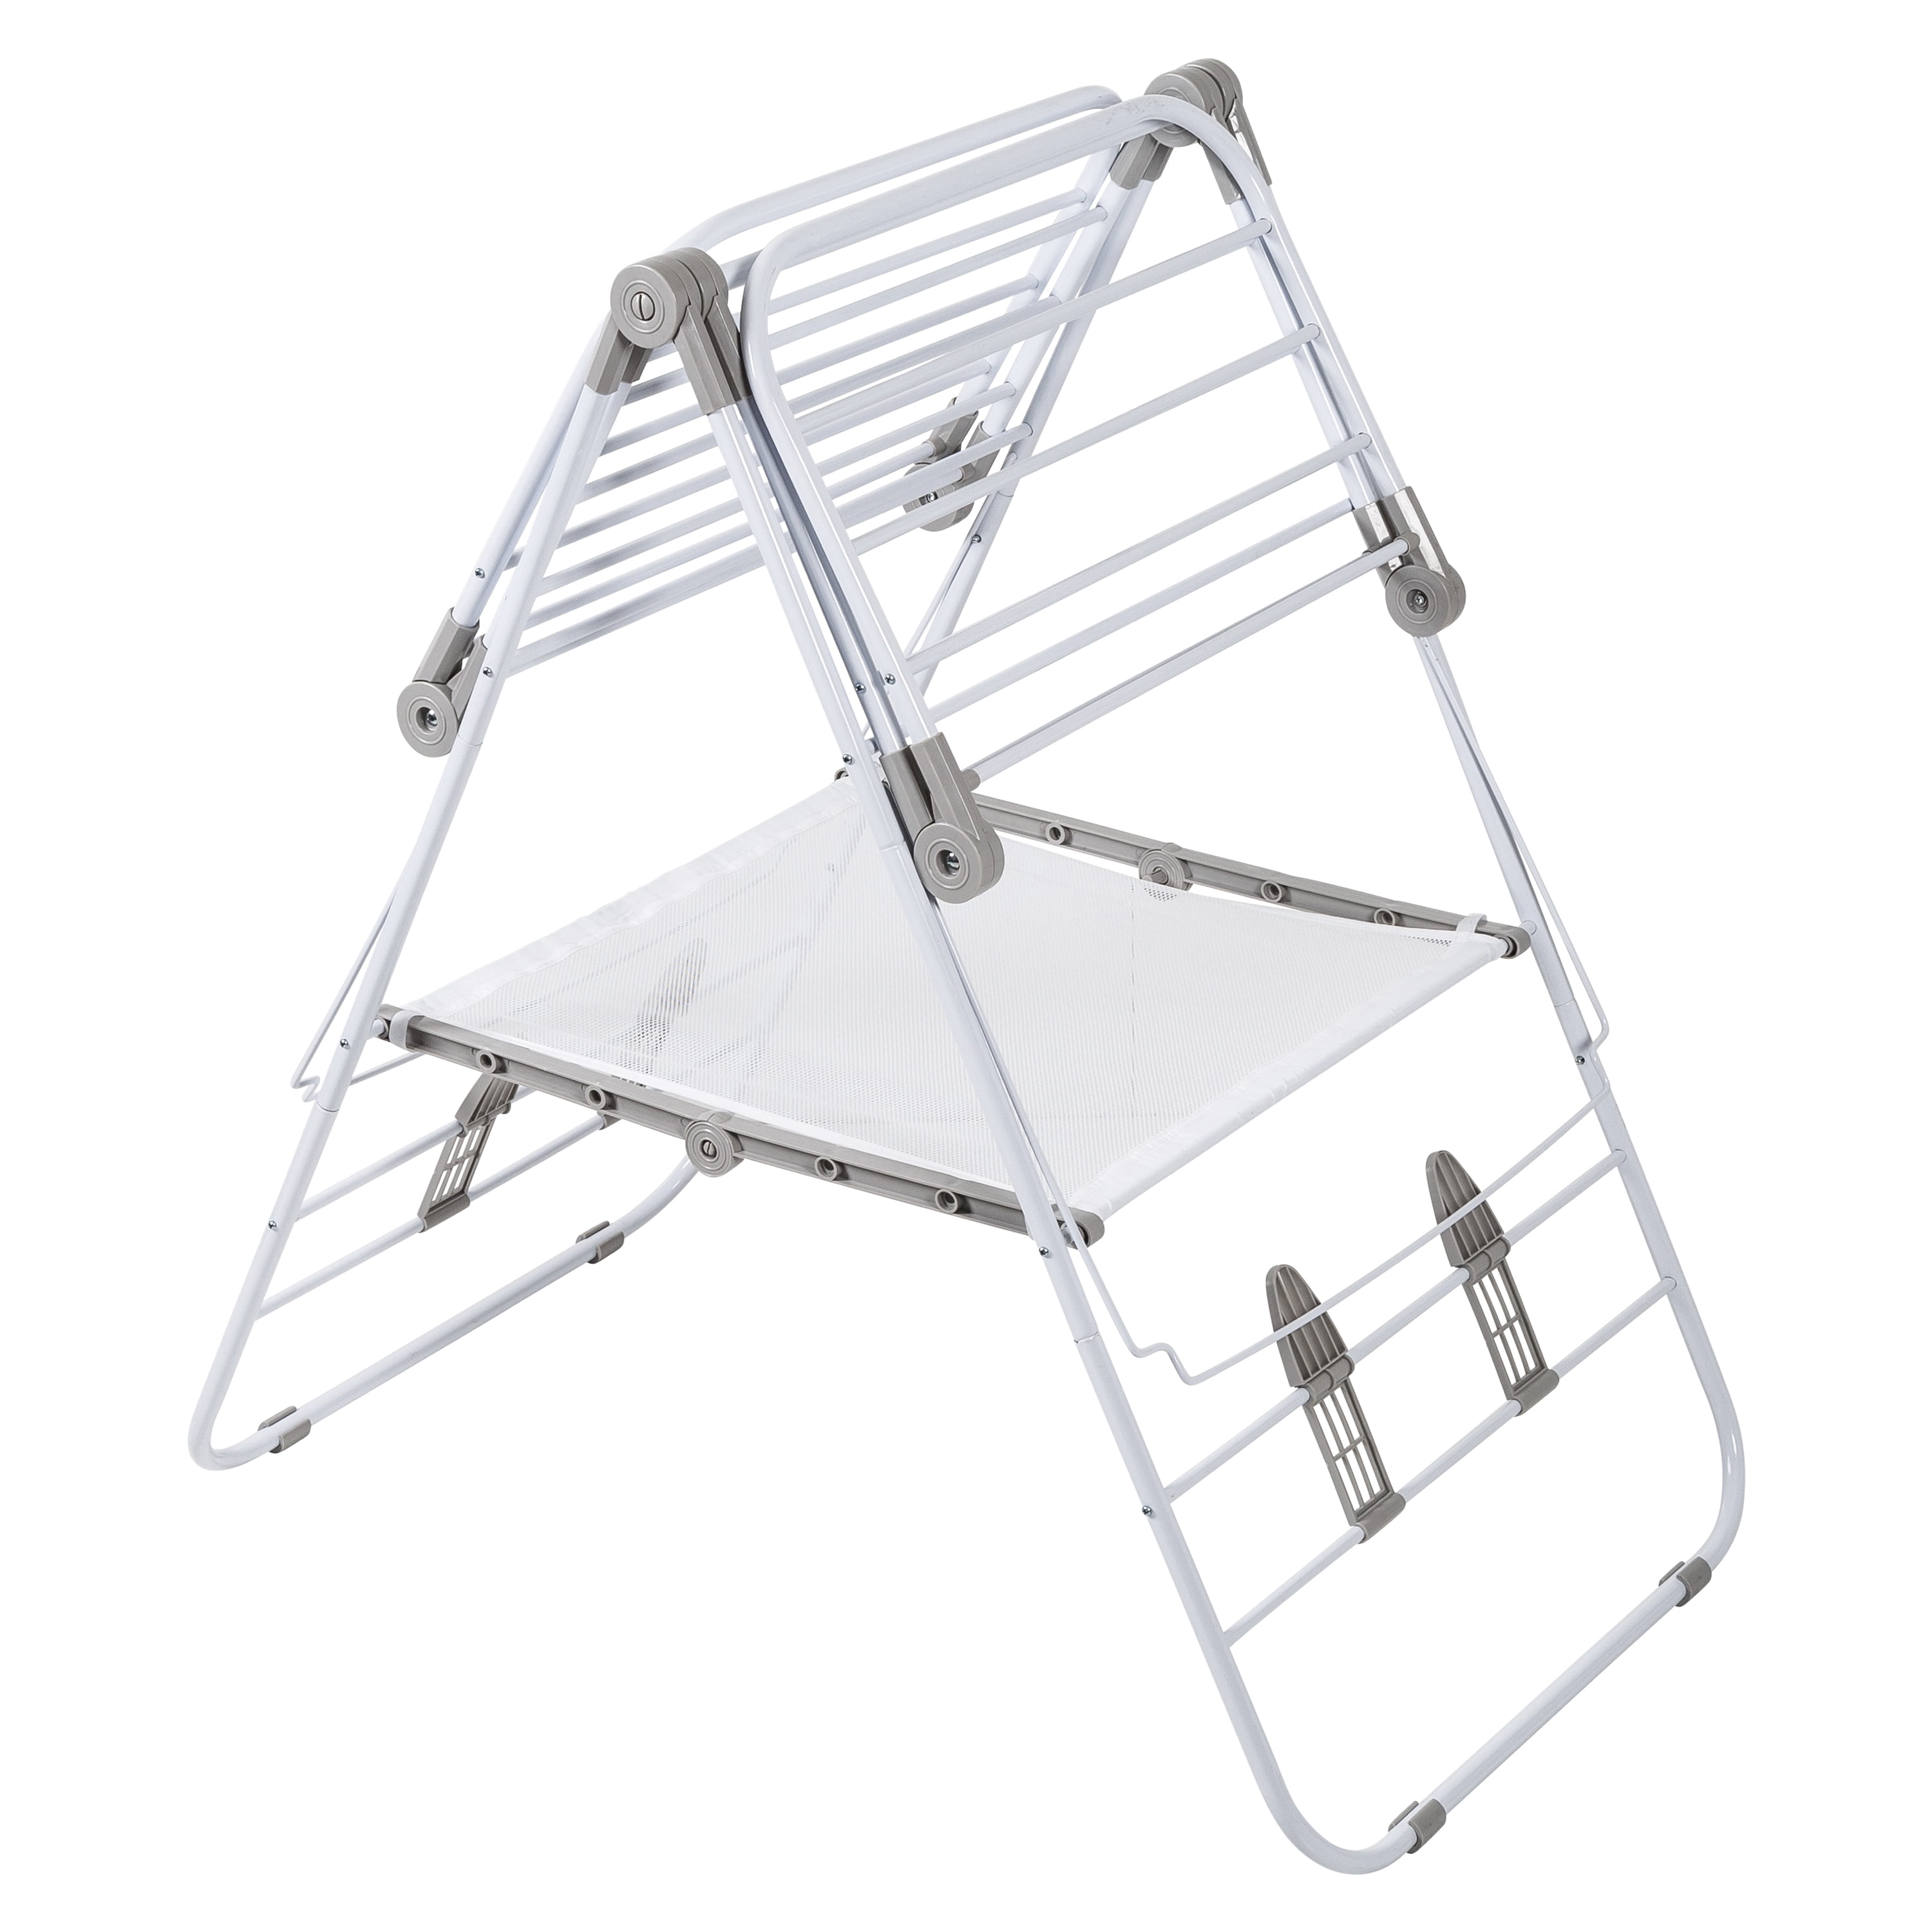 Honey-Can-Do Heavy-Duty Gullwing Clothes Drying Rack, 57 in. x 23.5 in. x  37 in.